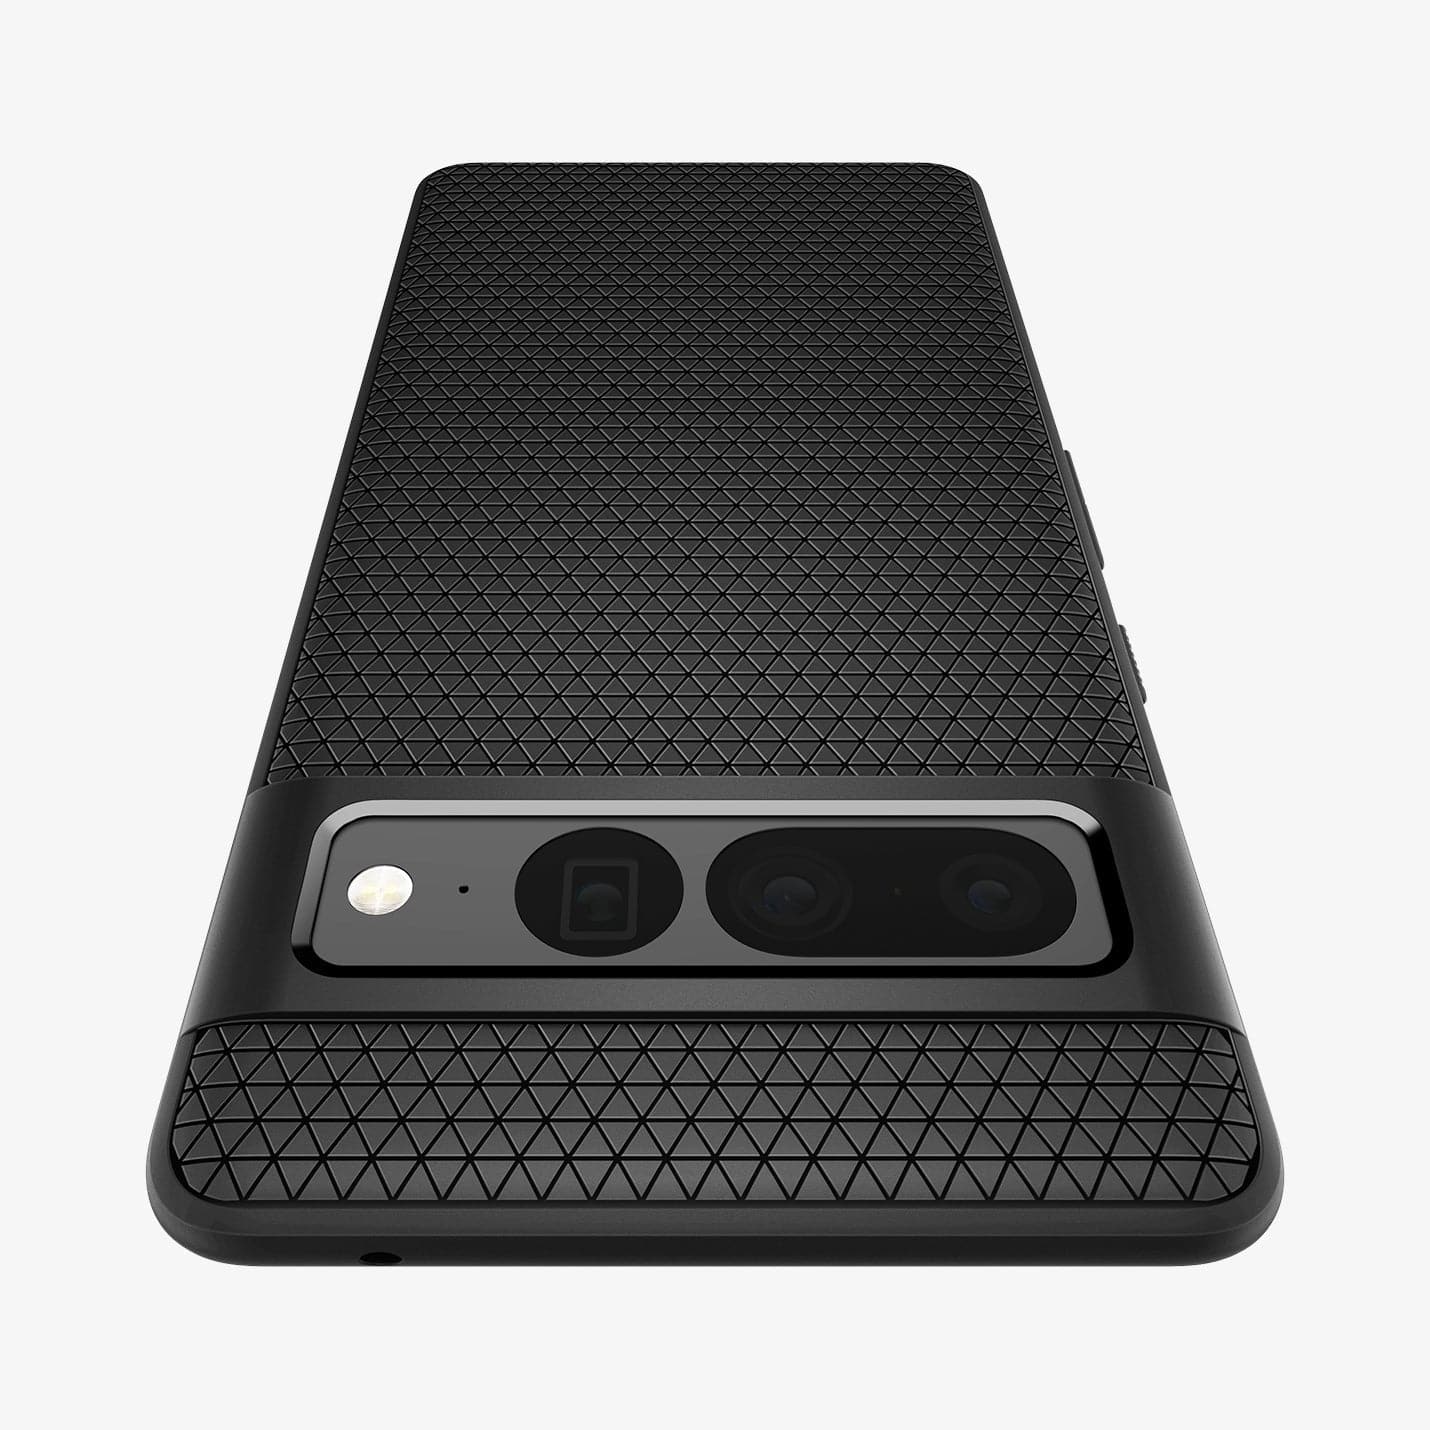 ACS04723 - Pixel 7 Pro Case Liquid Air in matte black showing the back zoomed in to show the fine details